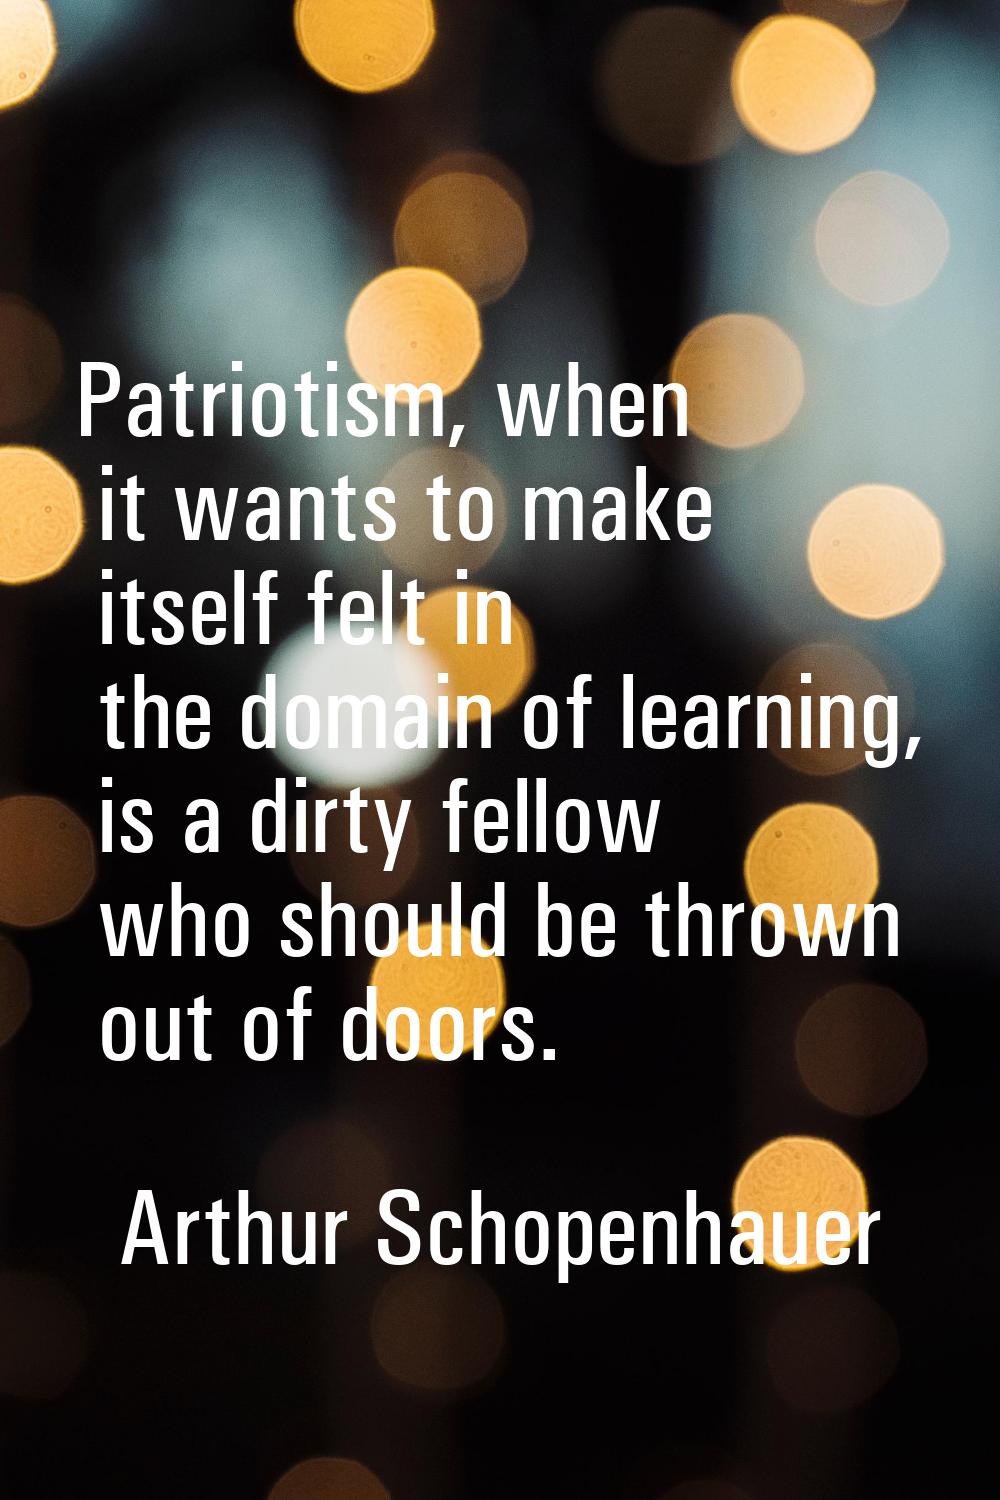 Patriotism, when it wants to make itself felt in the domain of learning, is a dirty fellow who shou